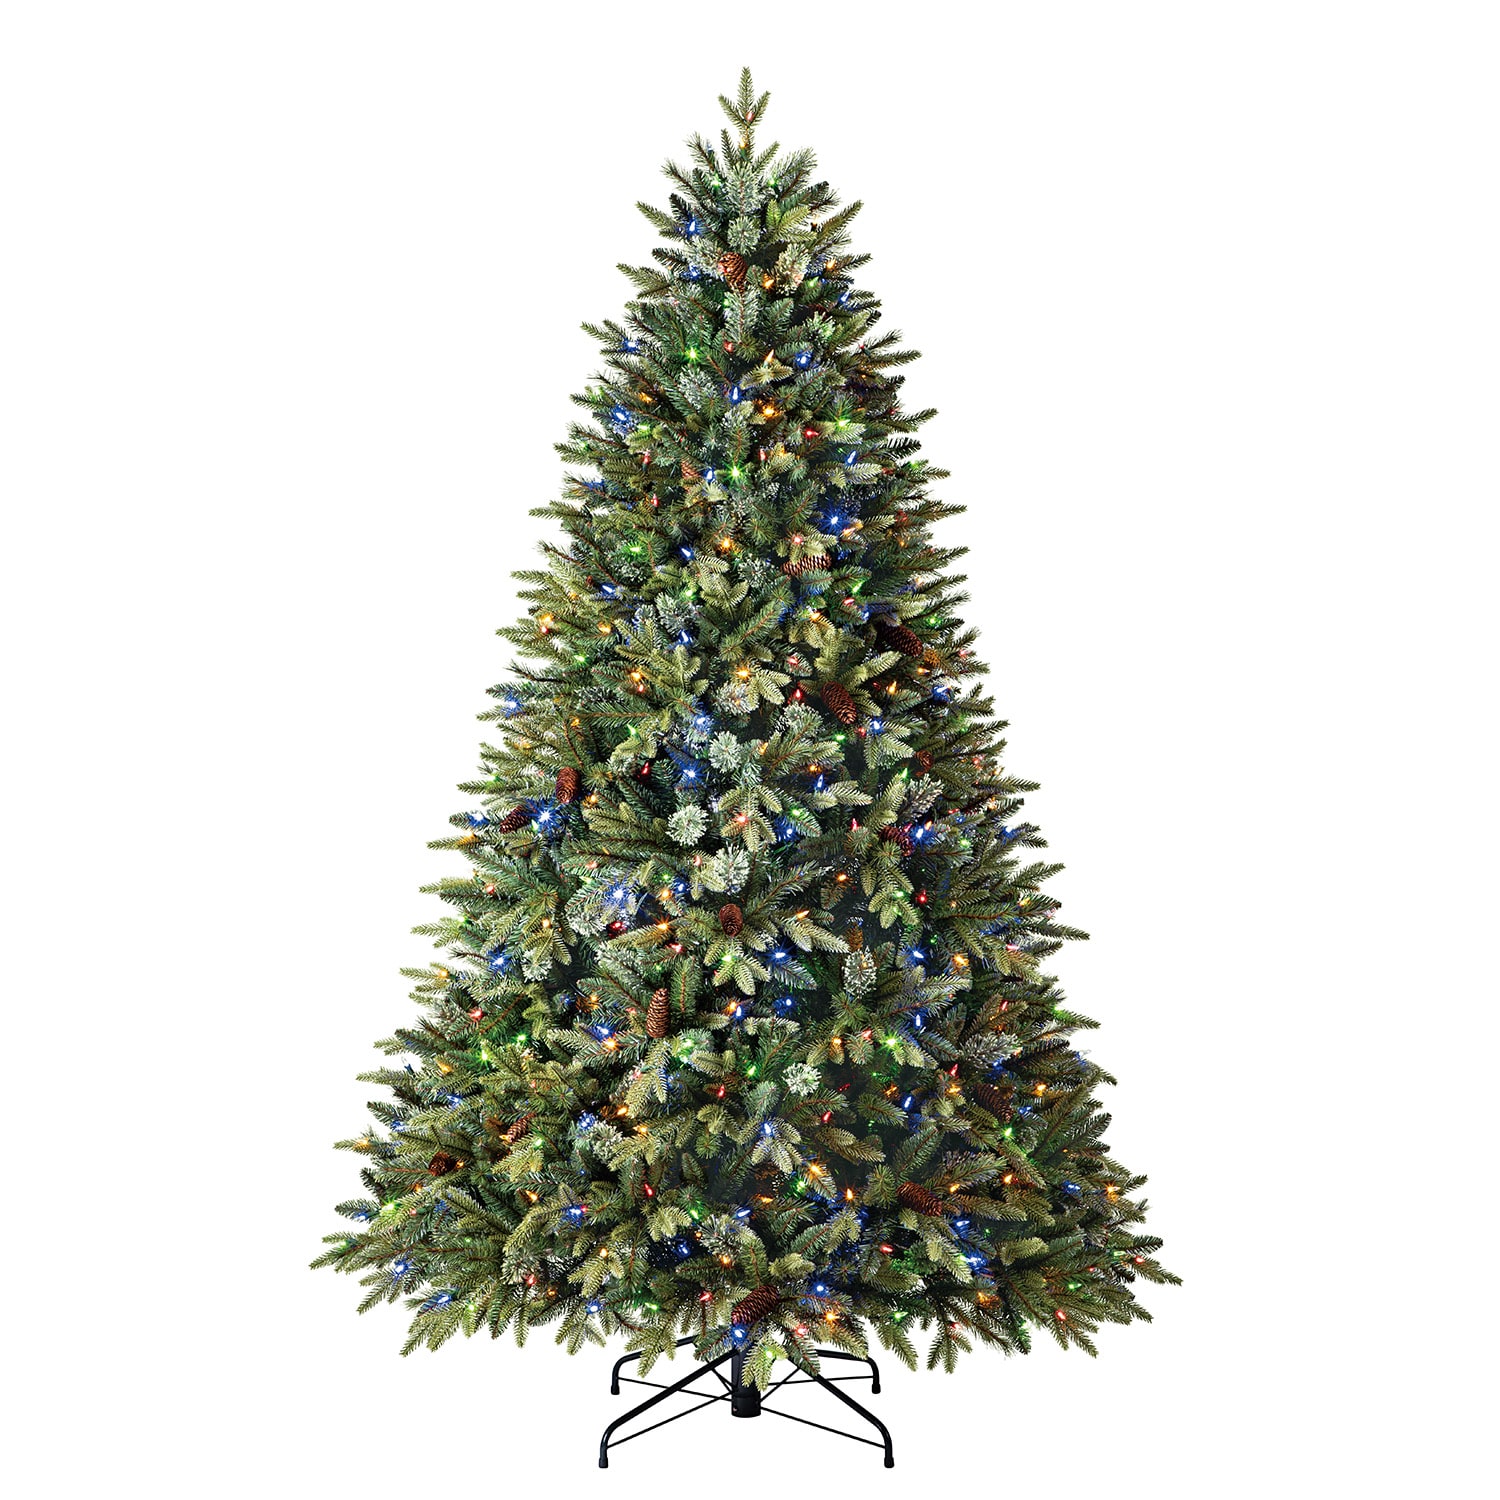 7.5 ft. Frosted Virginia Artificial Christmas Tree with 600 Clear LED Lights - 55 in. Wide